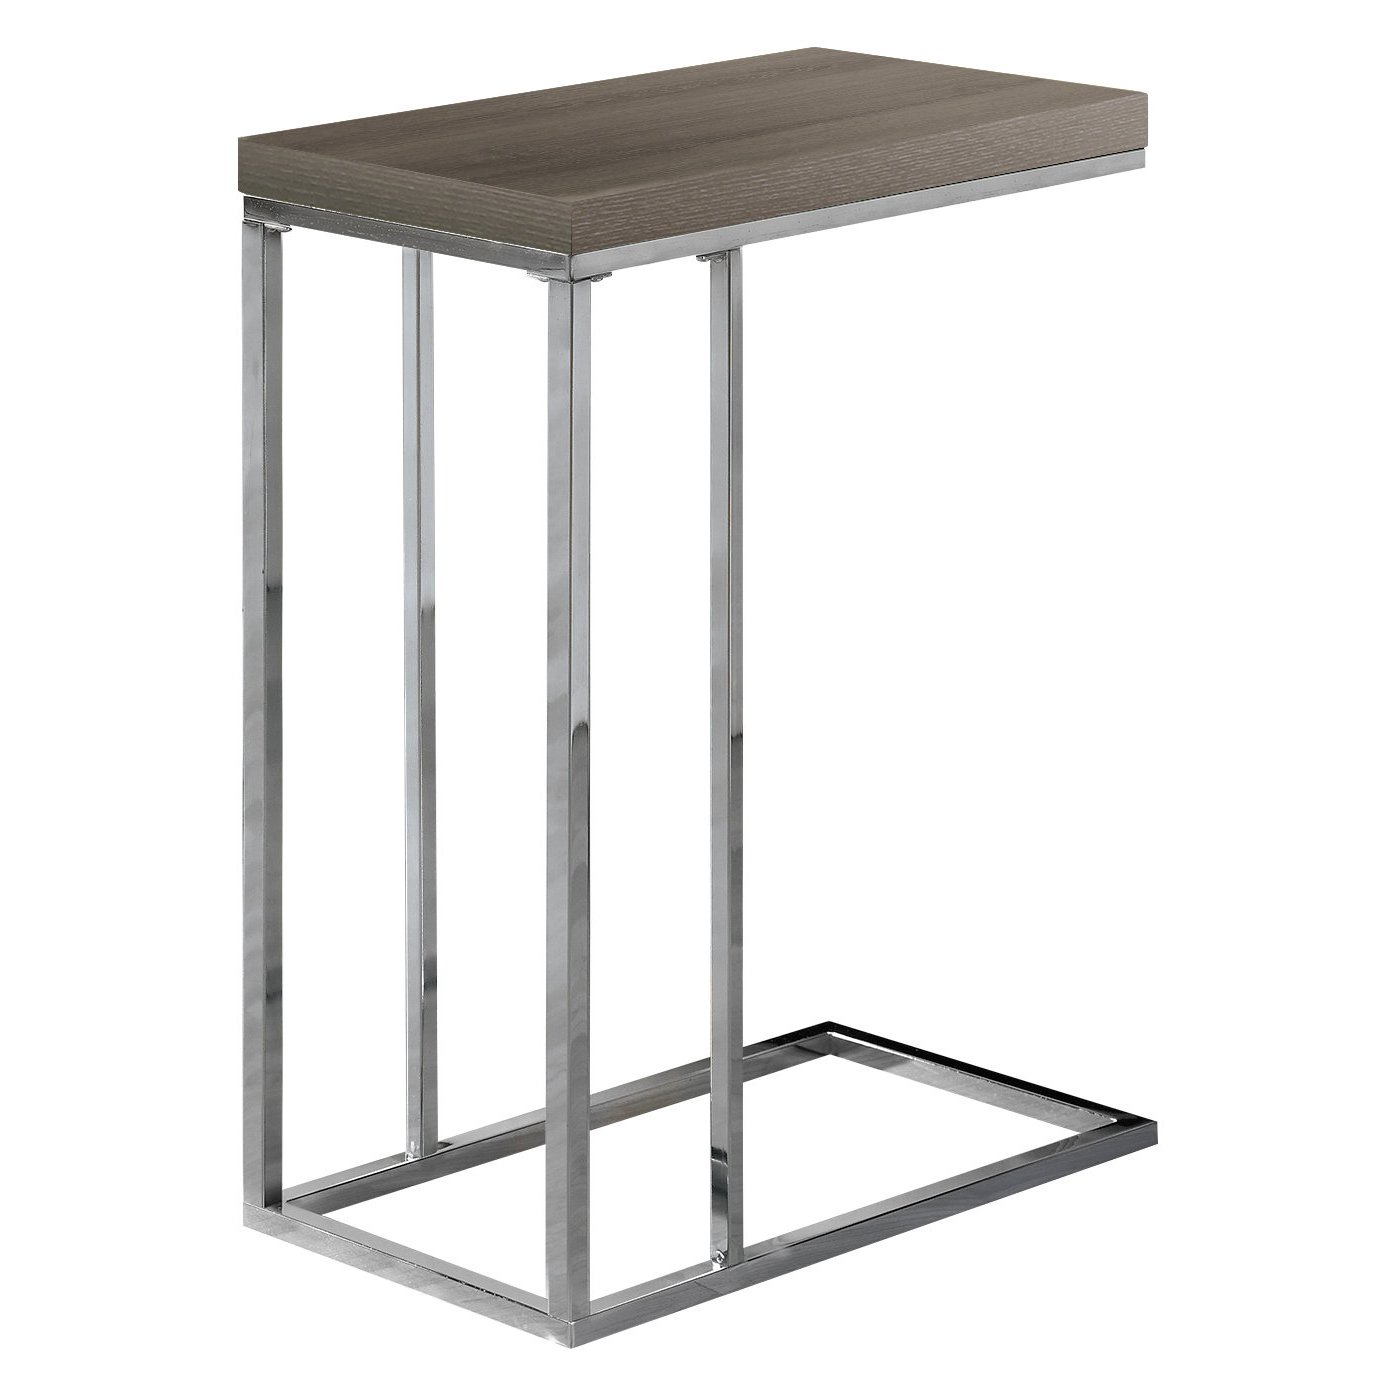 monarch specialties accent table chrome metal mirrored dark taupe kitchen dining wood end with legs beach themed home decor pull out sofa round outdoor tablecloth coffee bases for